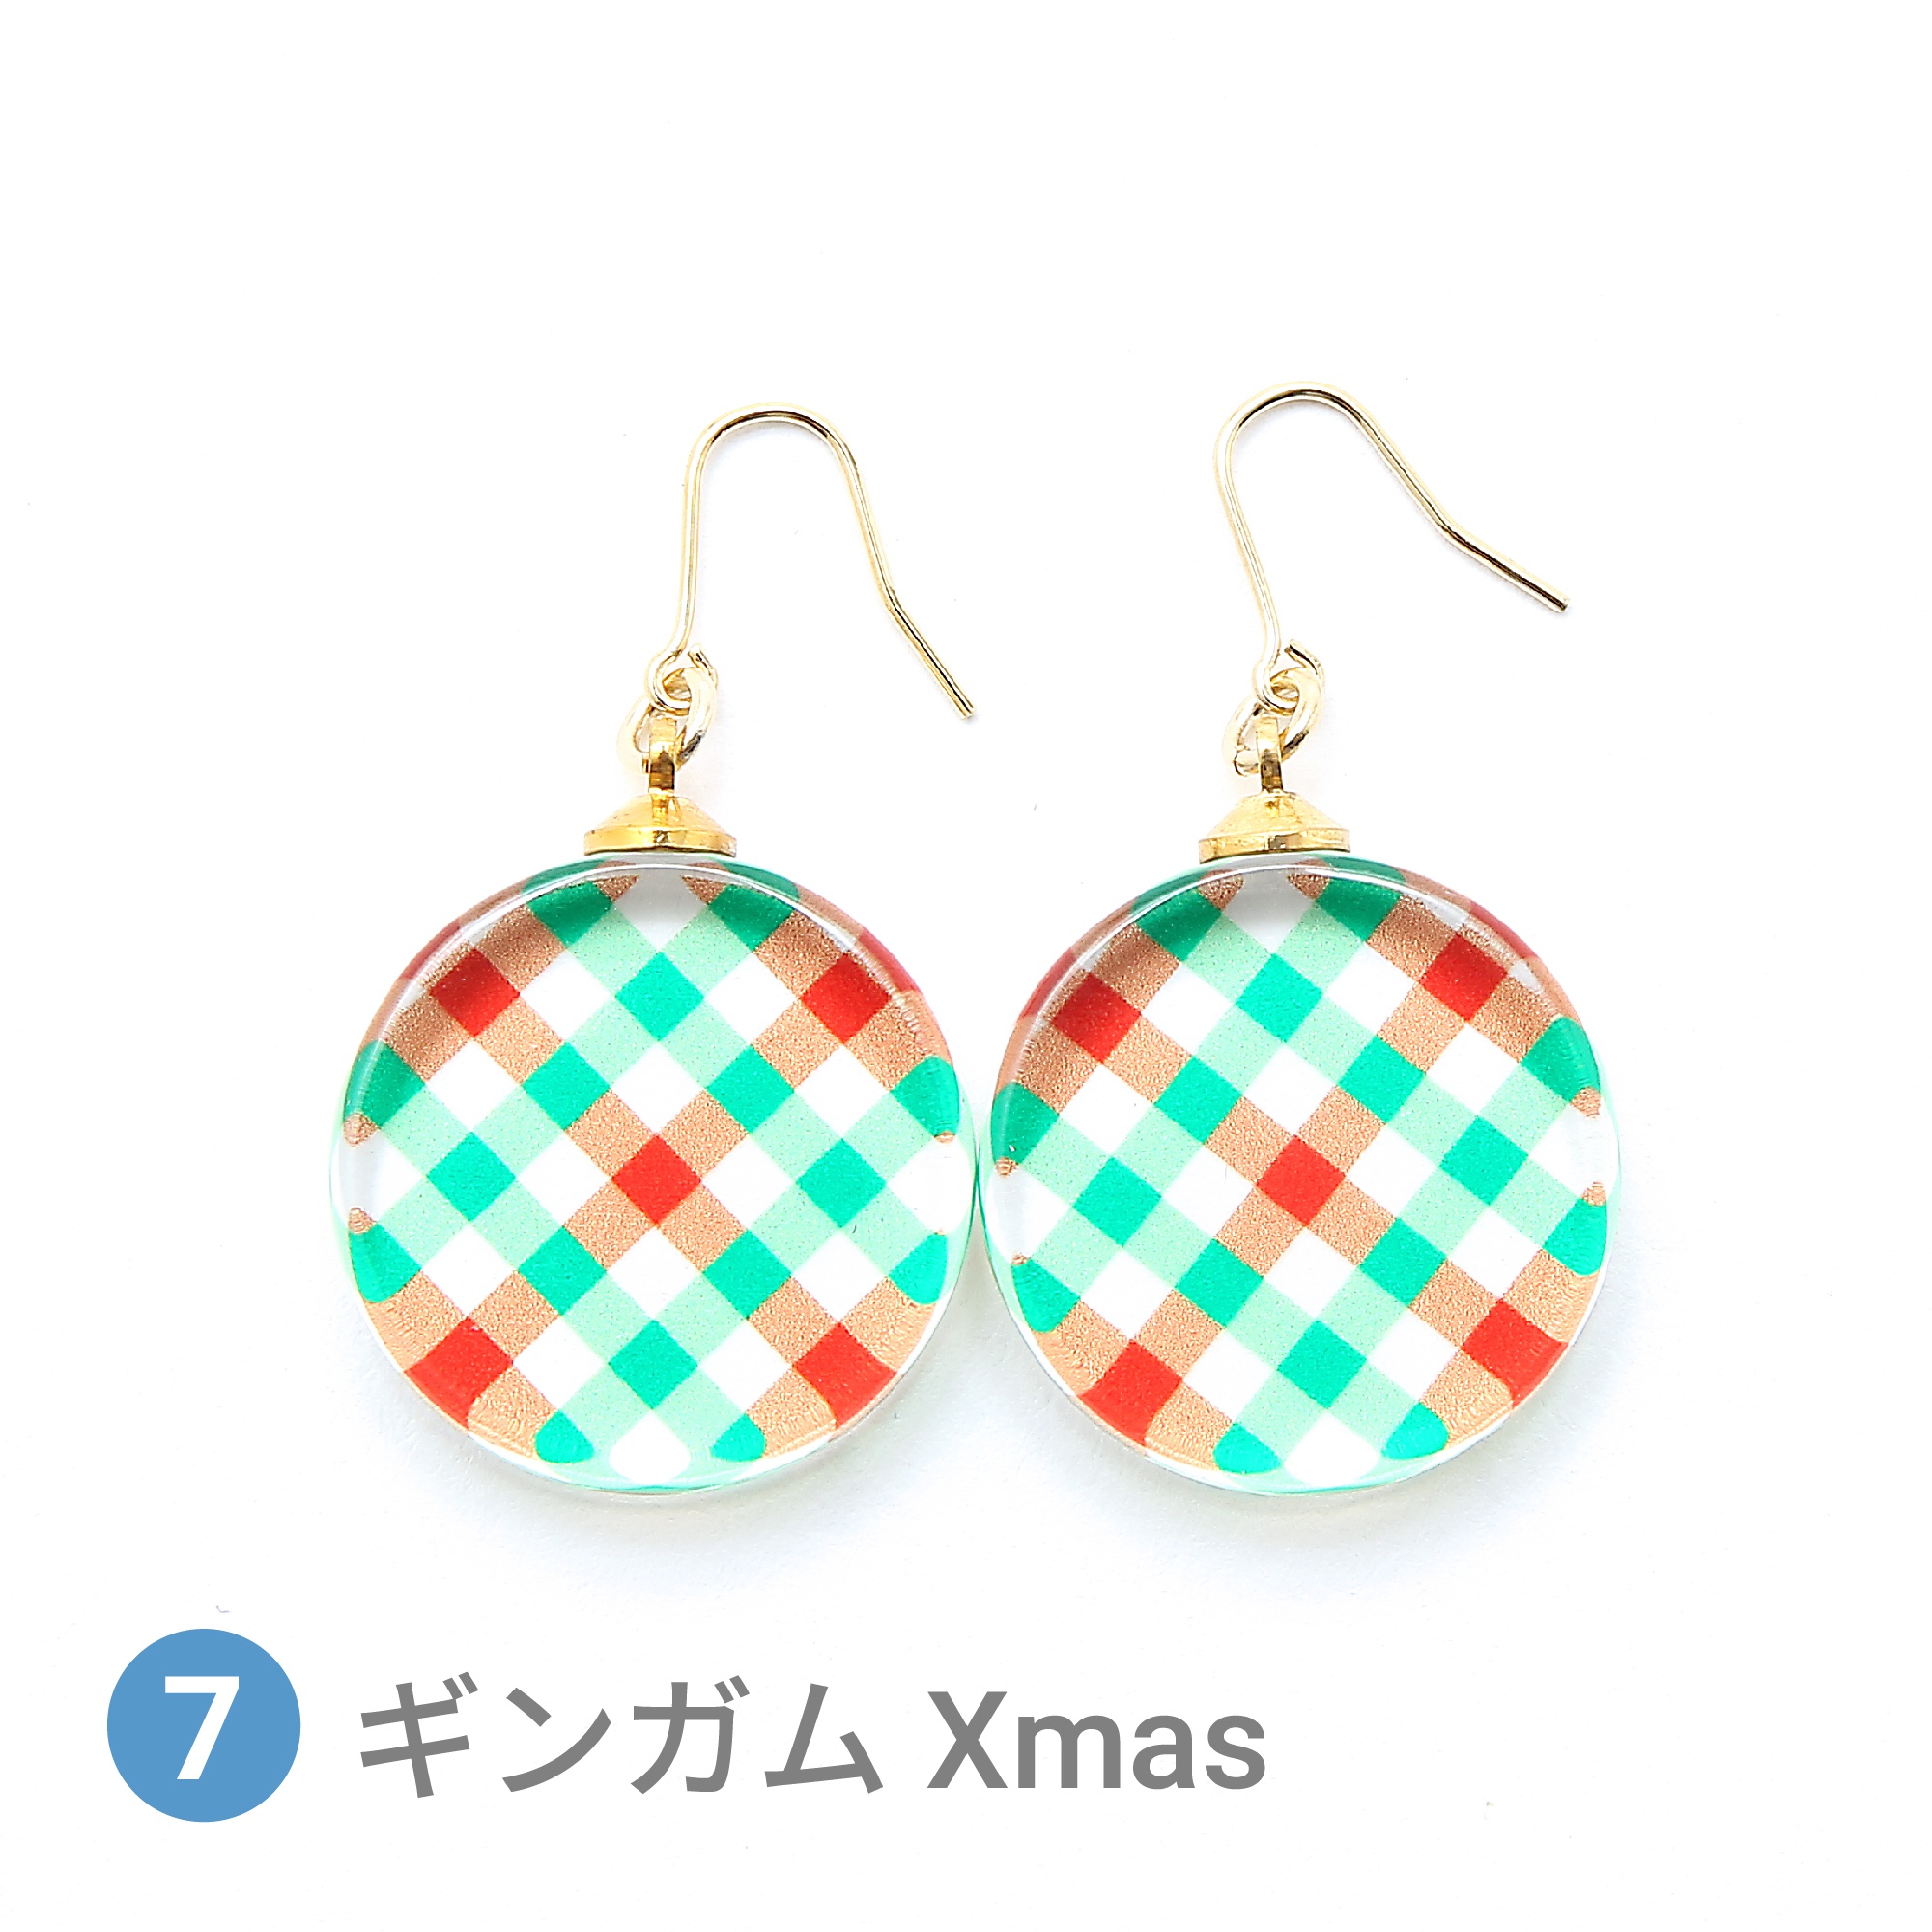 Glass accessories Pierced Earring Xmas color gingham round shape